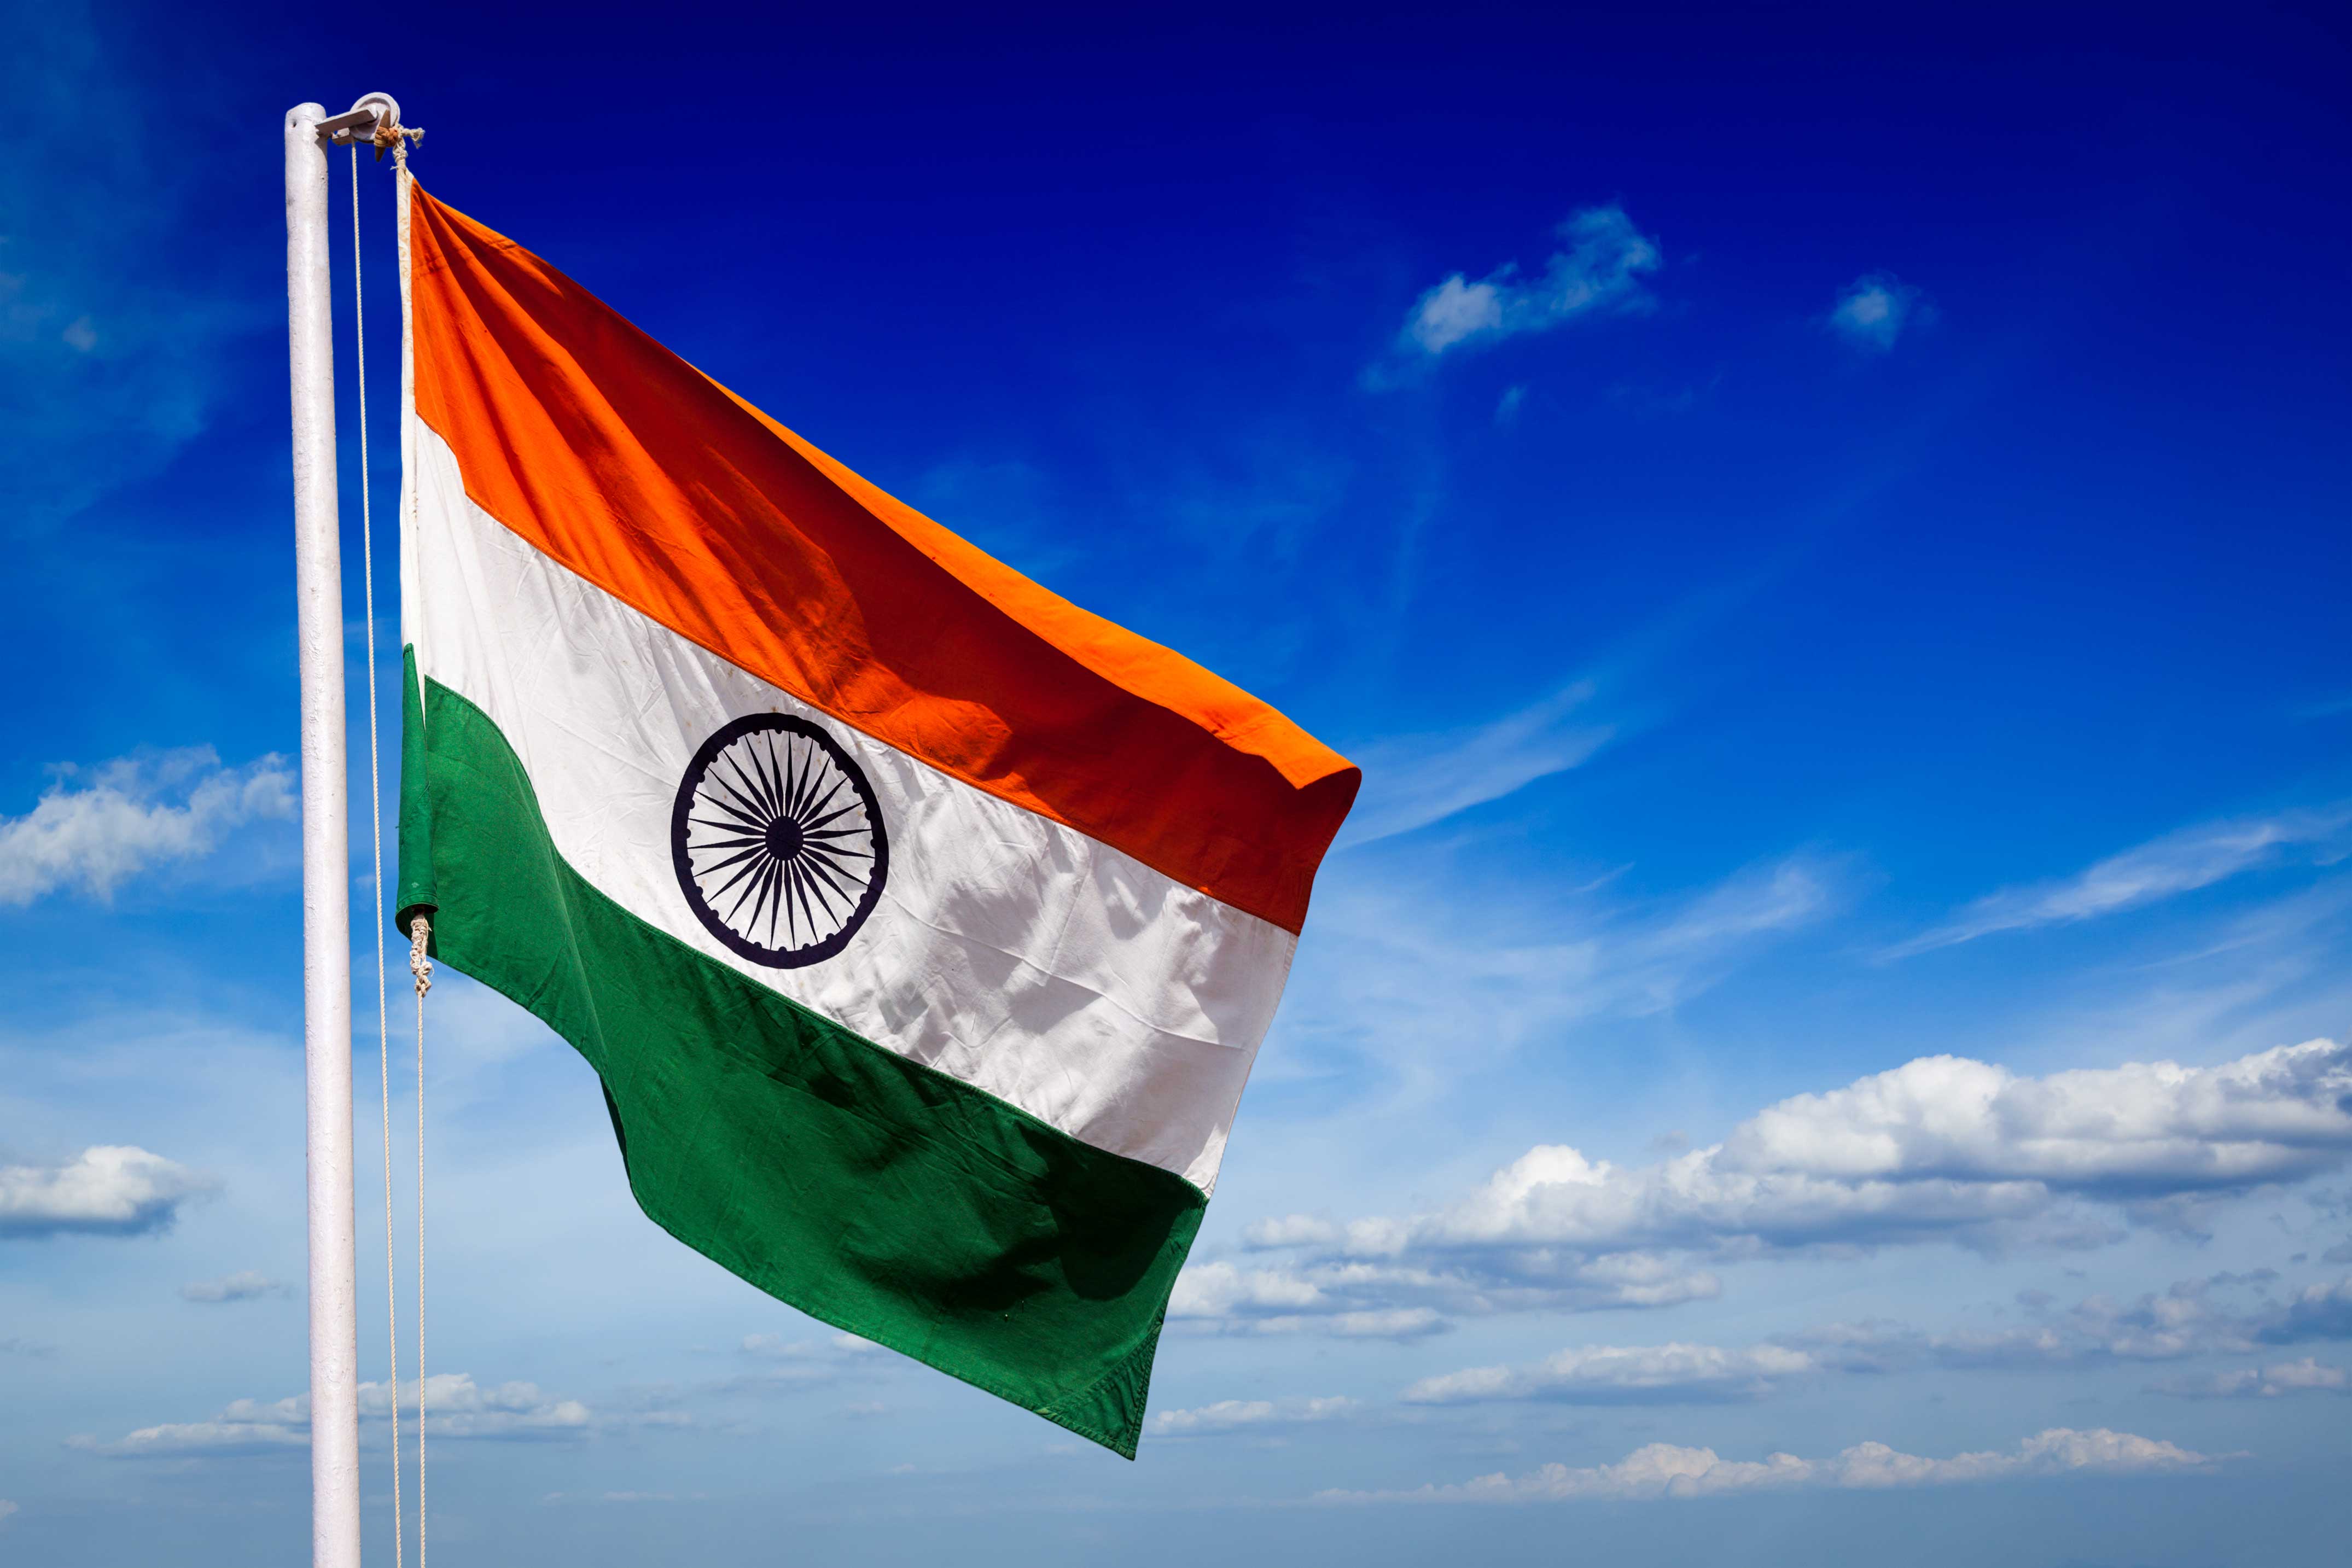 Indian Flag Wallpapers & HD Images 2020 [Free Download]